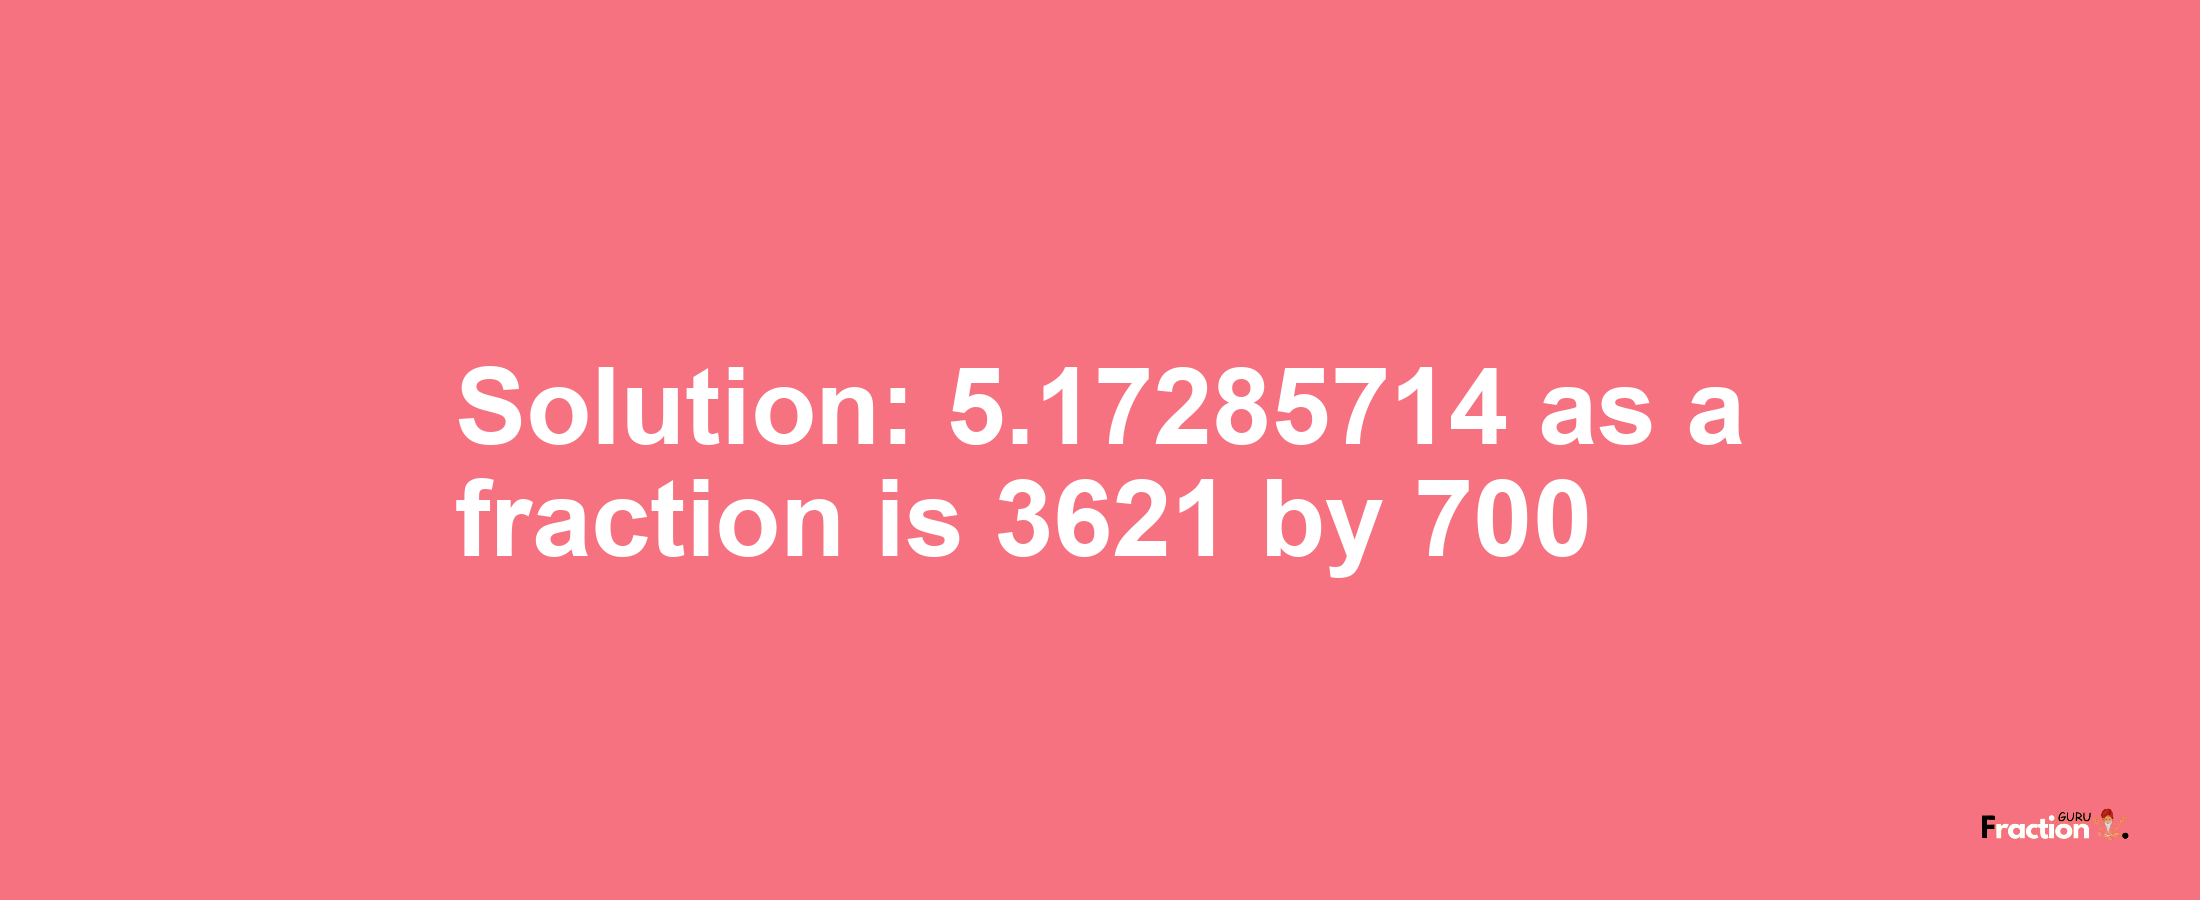 Solution:5.17285714 as a fraction is 3621/700